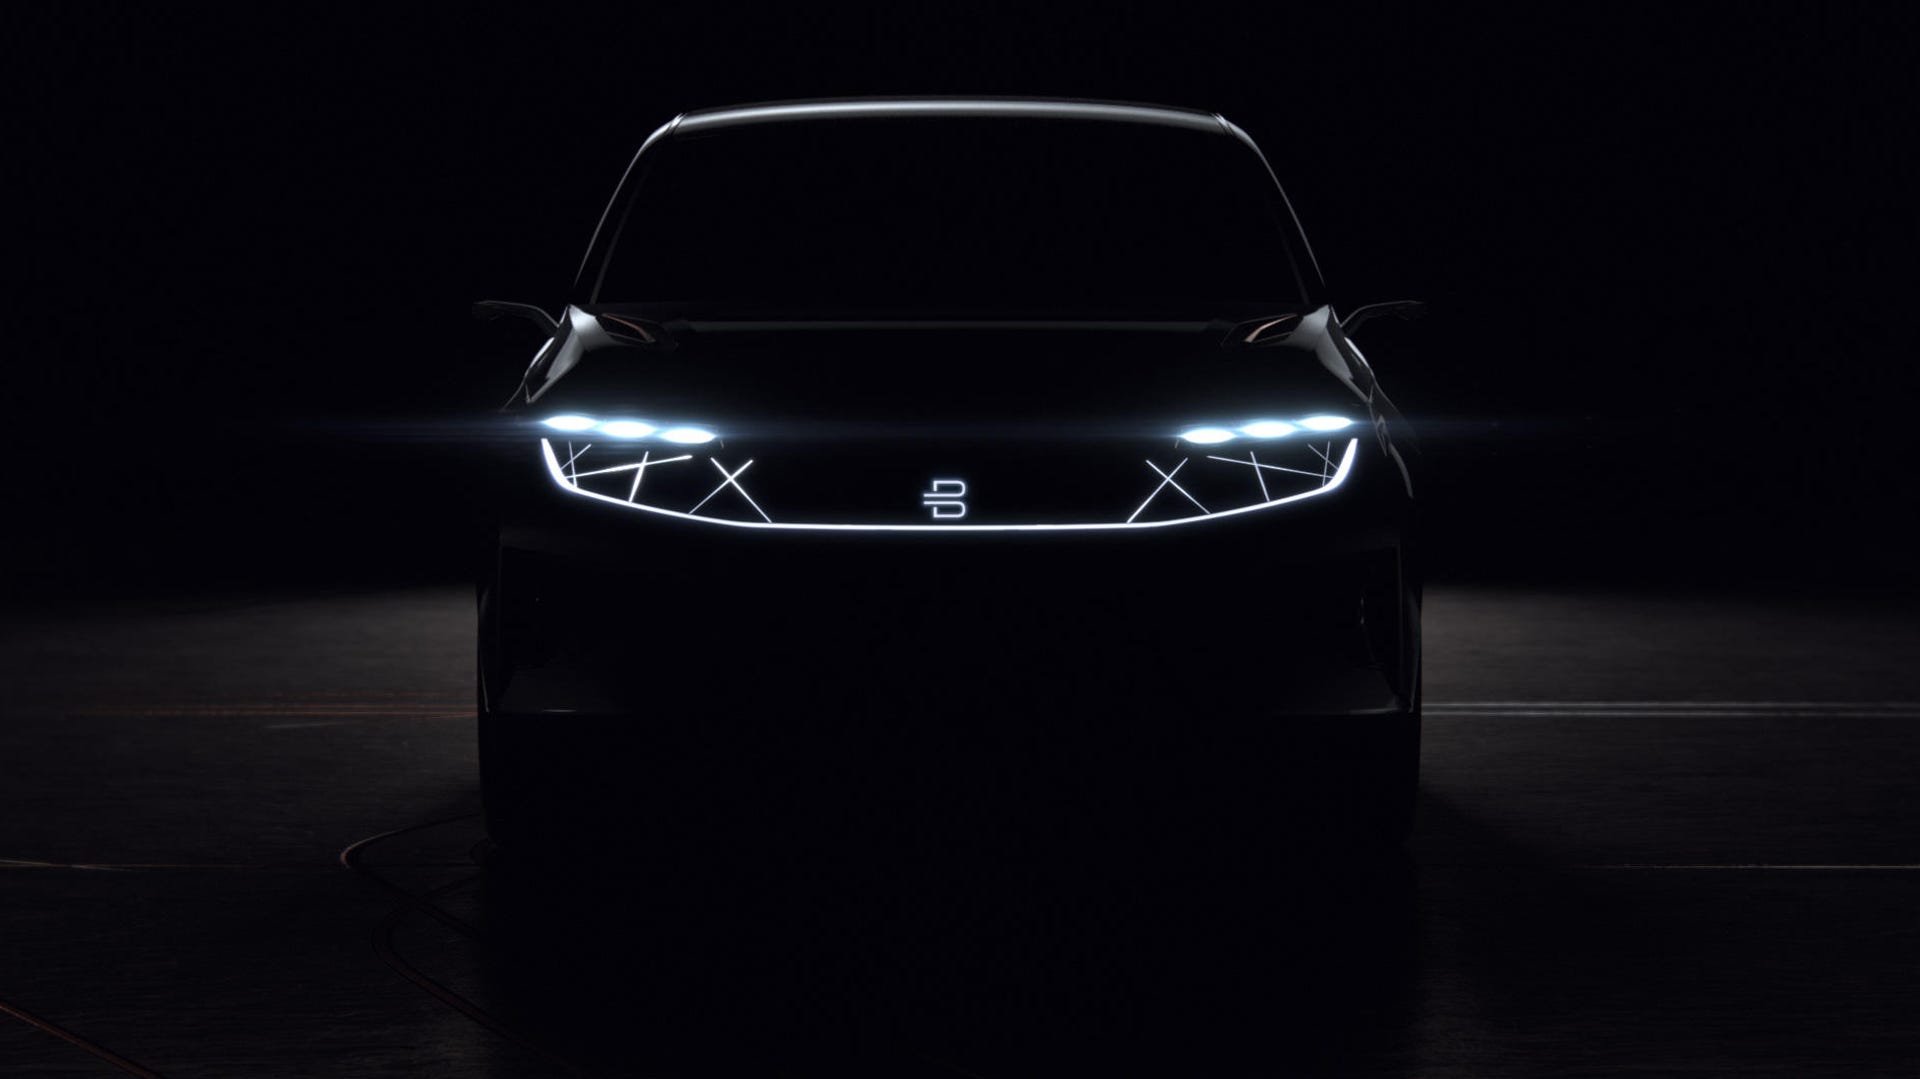 Future Mobility Corporation Byton SUV teaser